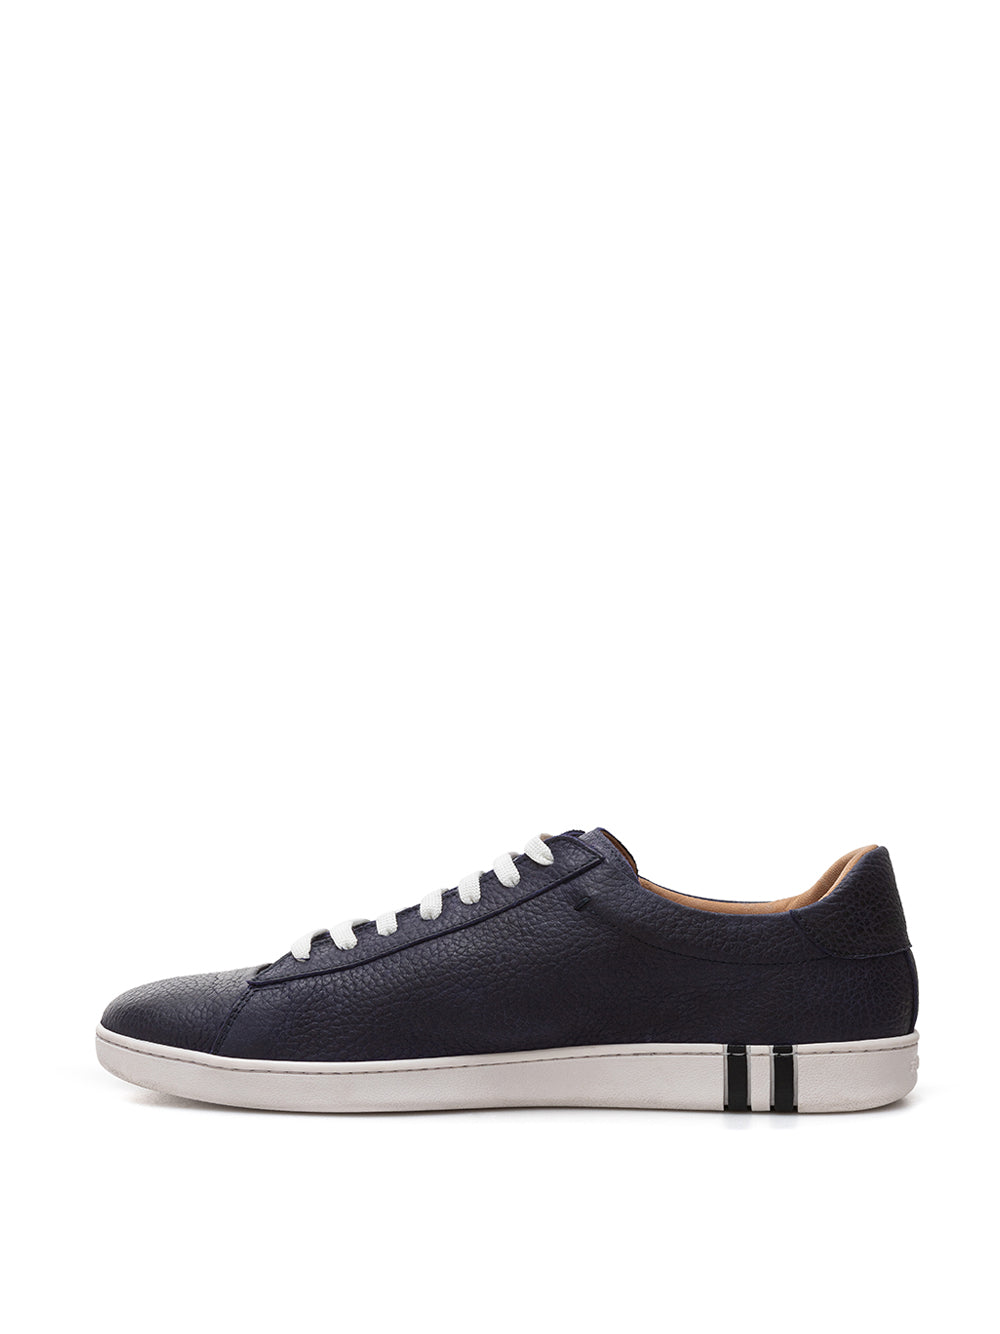 Bally Blue Leather Sneakers